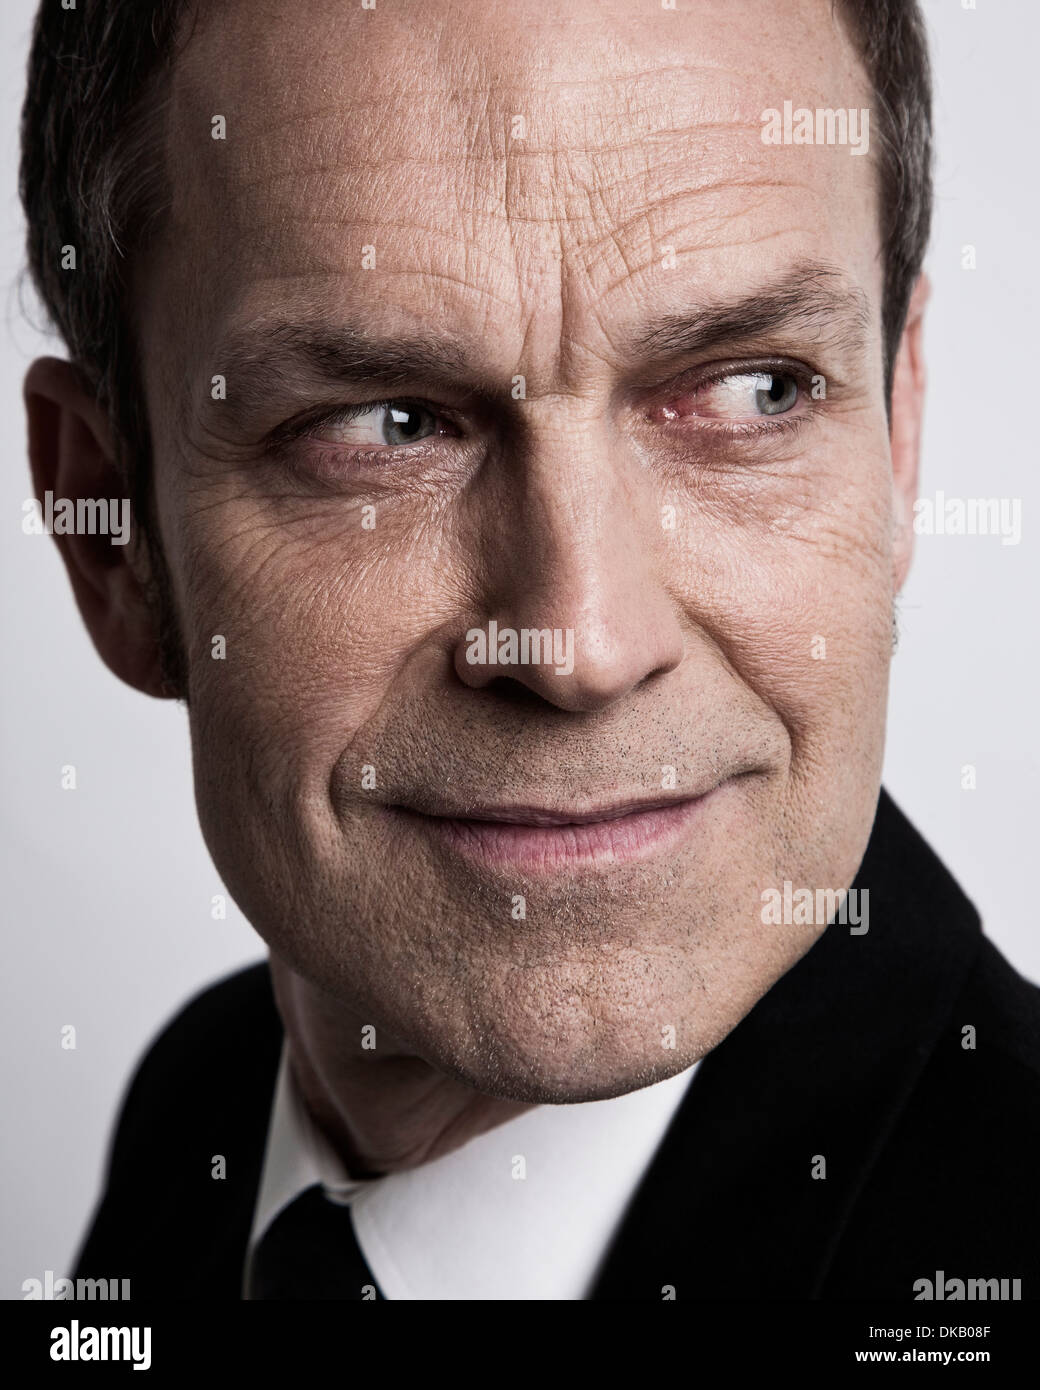 Close up of businessman looking sinister Stock Photo